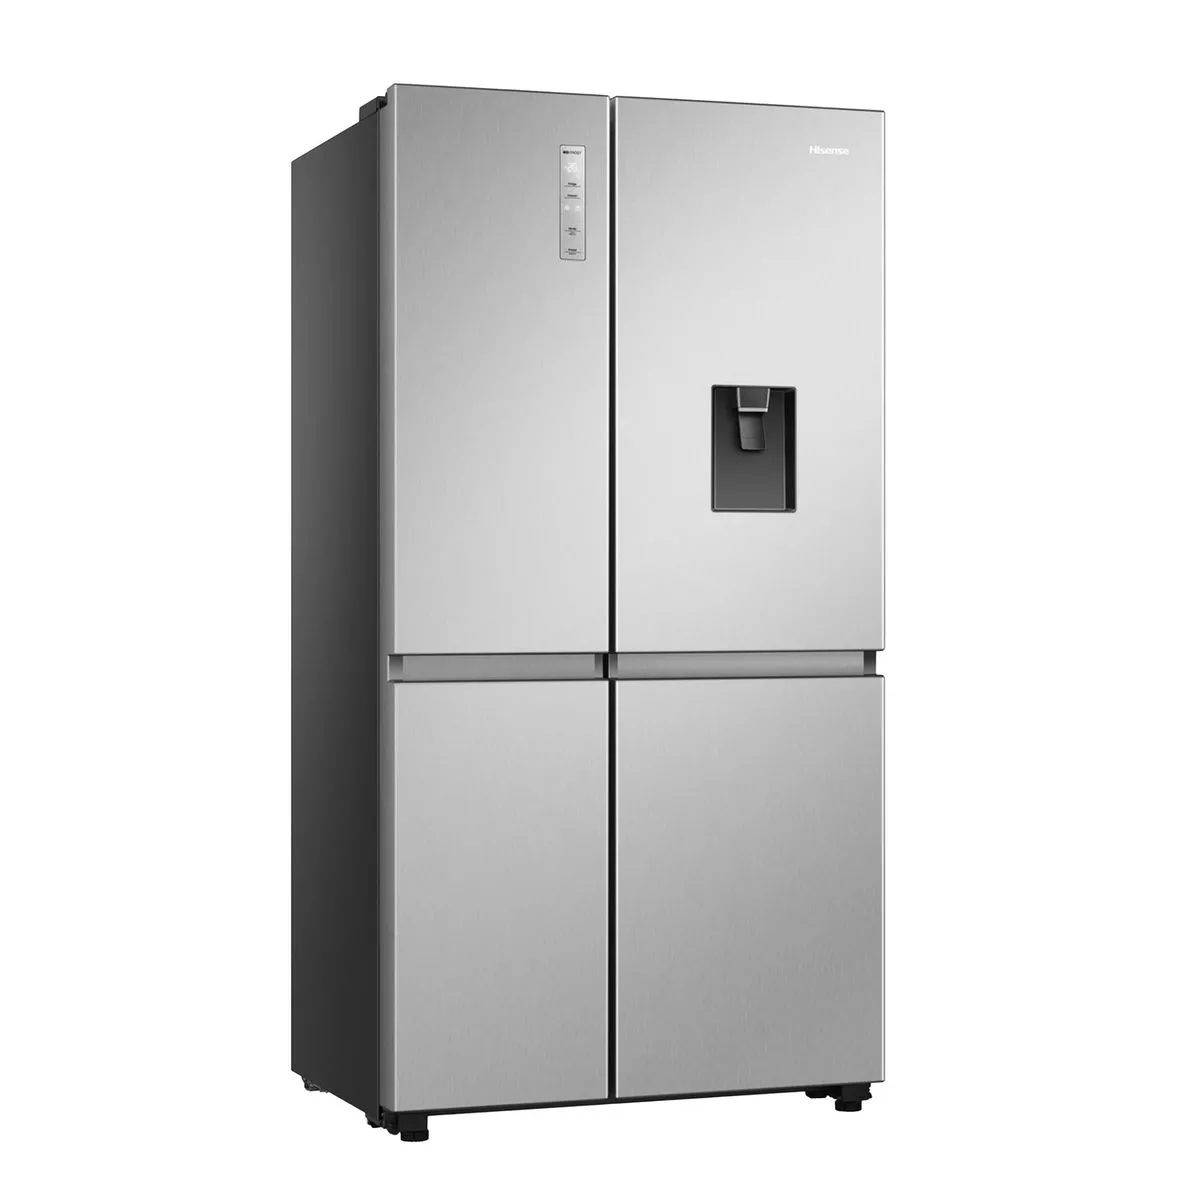 RC-87WC REFRIGERATEUR HISENSE SIDE BY SIDE 780L No Frost - 1